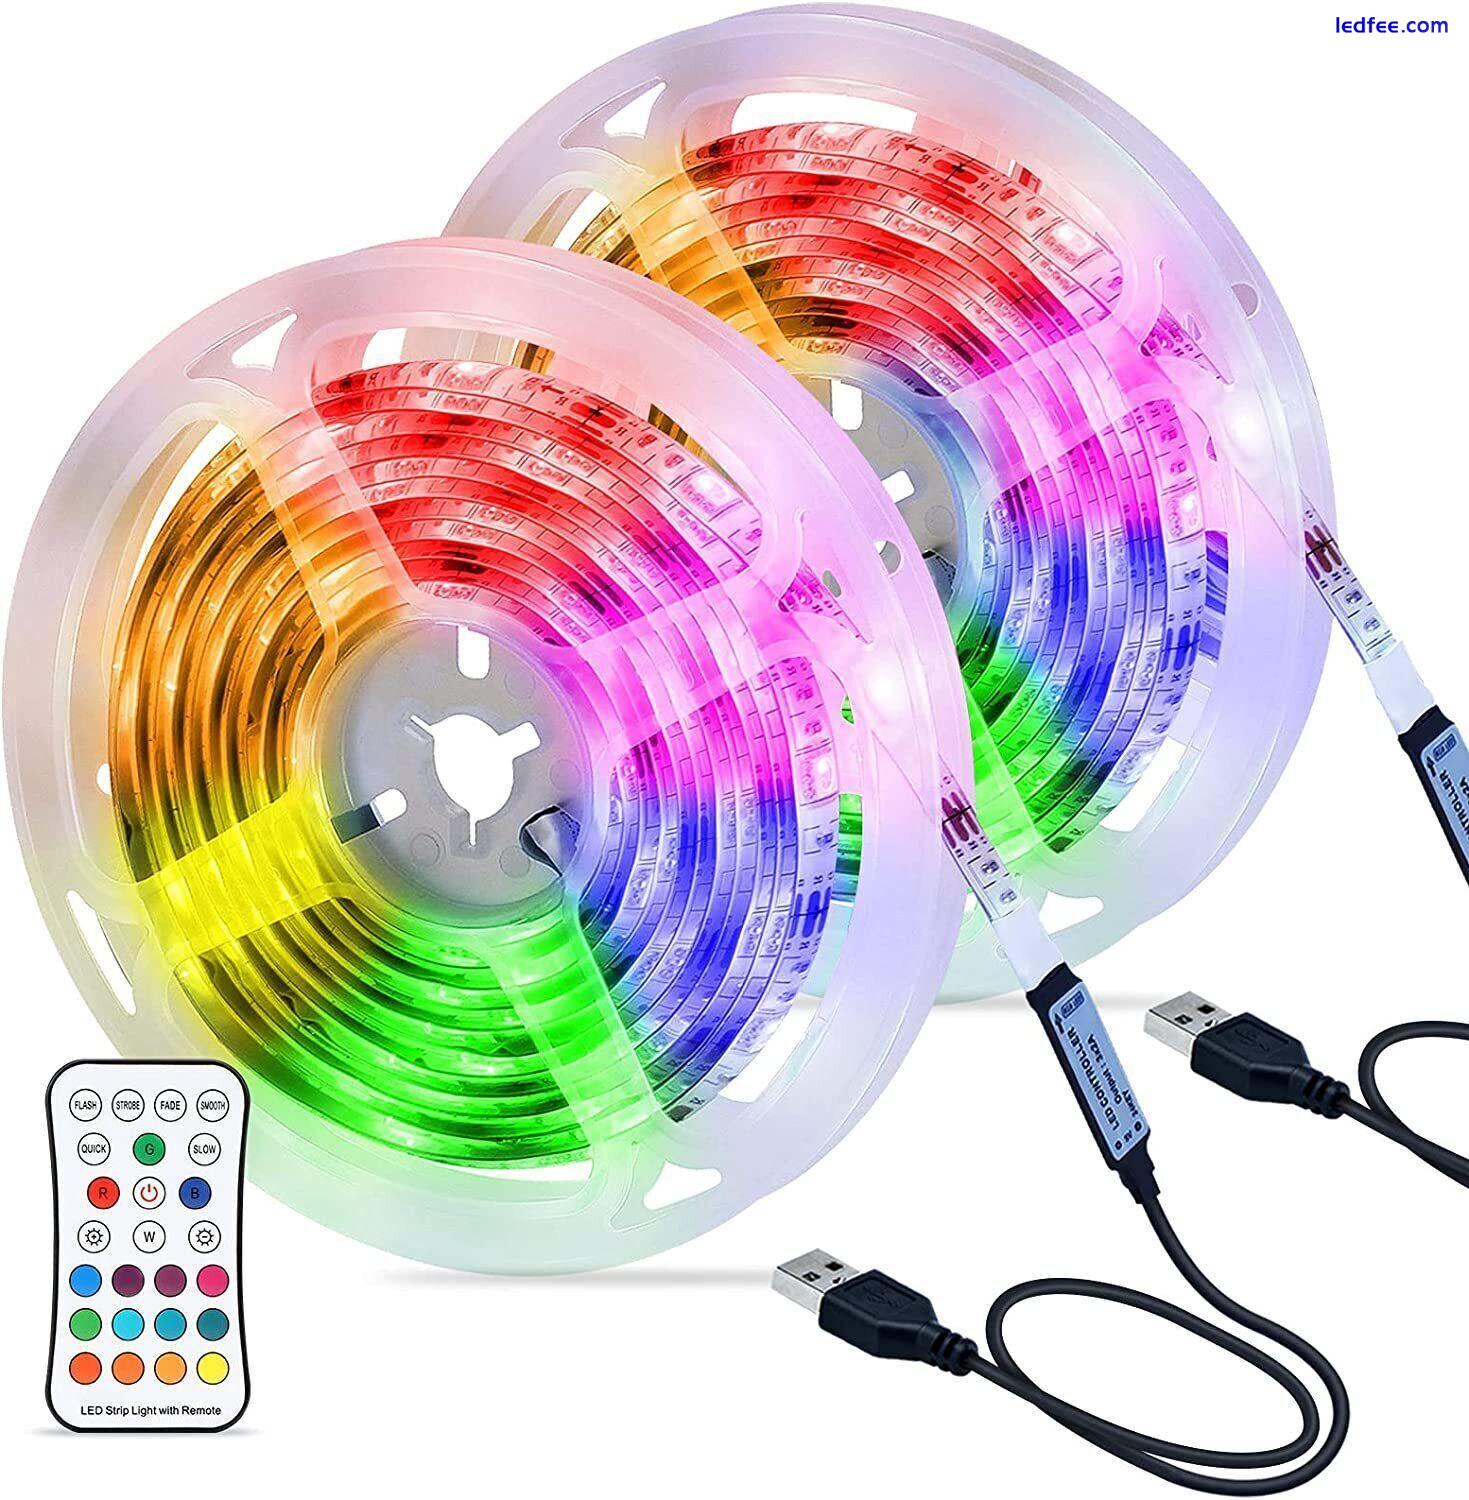 LED Strip Lights Colour Changing for Bedroom, Living Room with remote and USB 4 